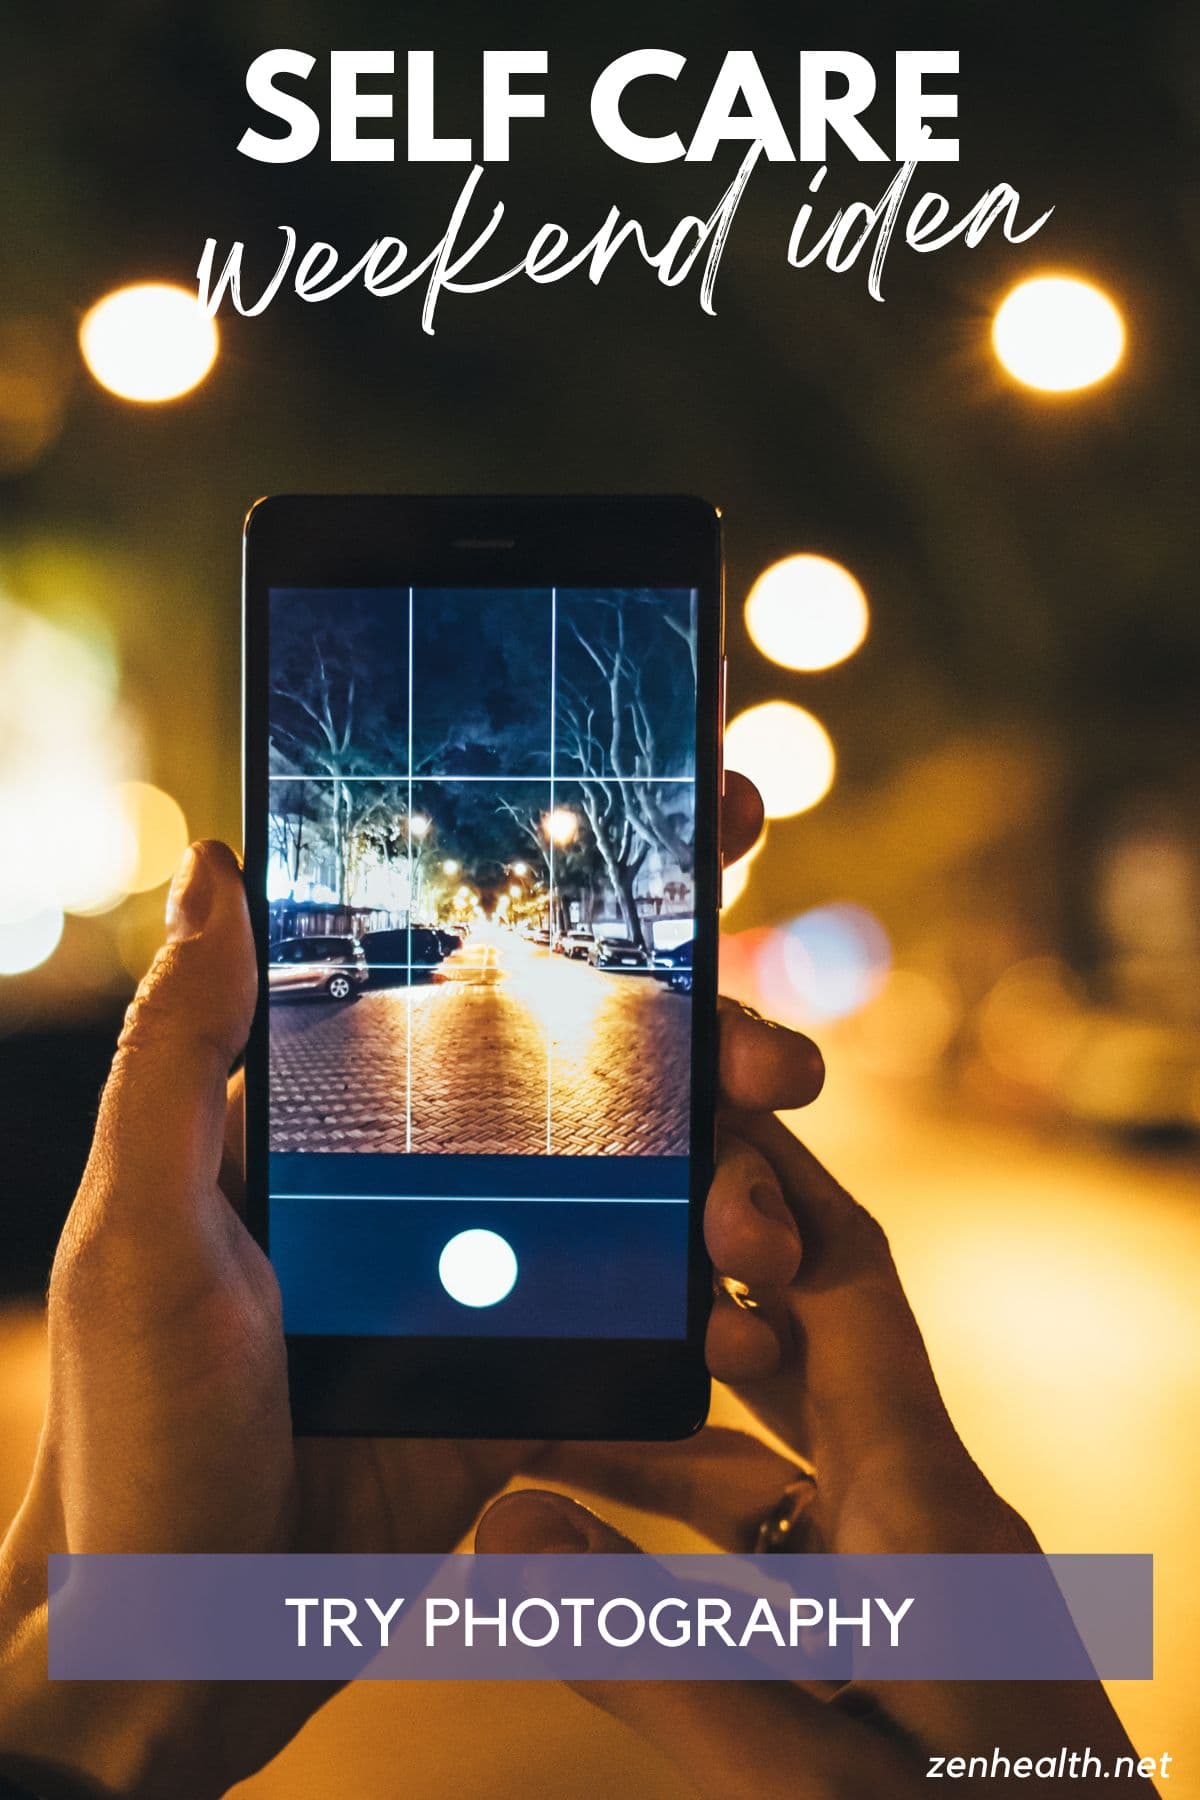 self care weekend idea: try photography text overlay on a photo of a phone taking a night photo of the street